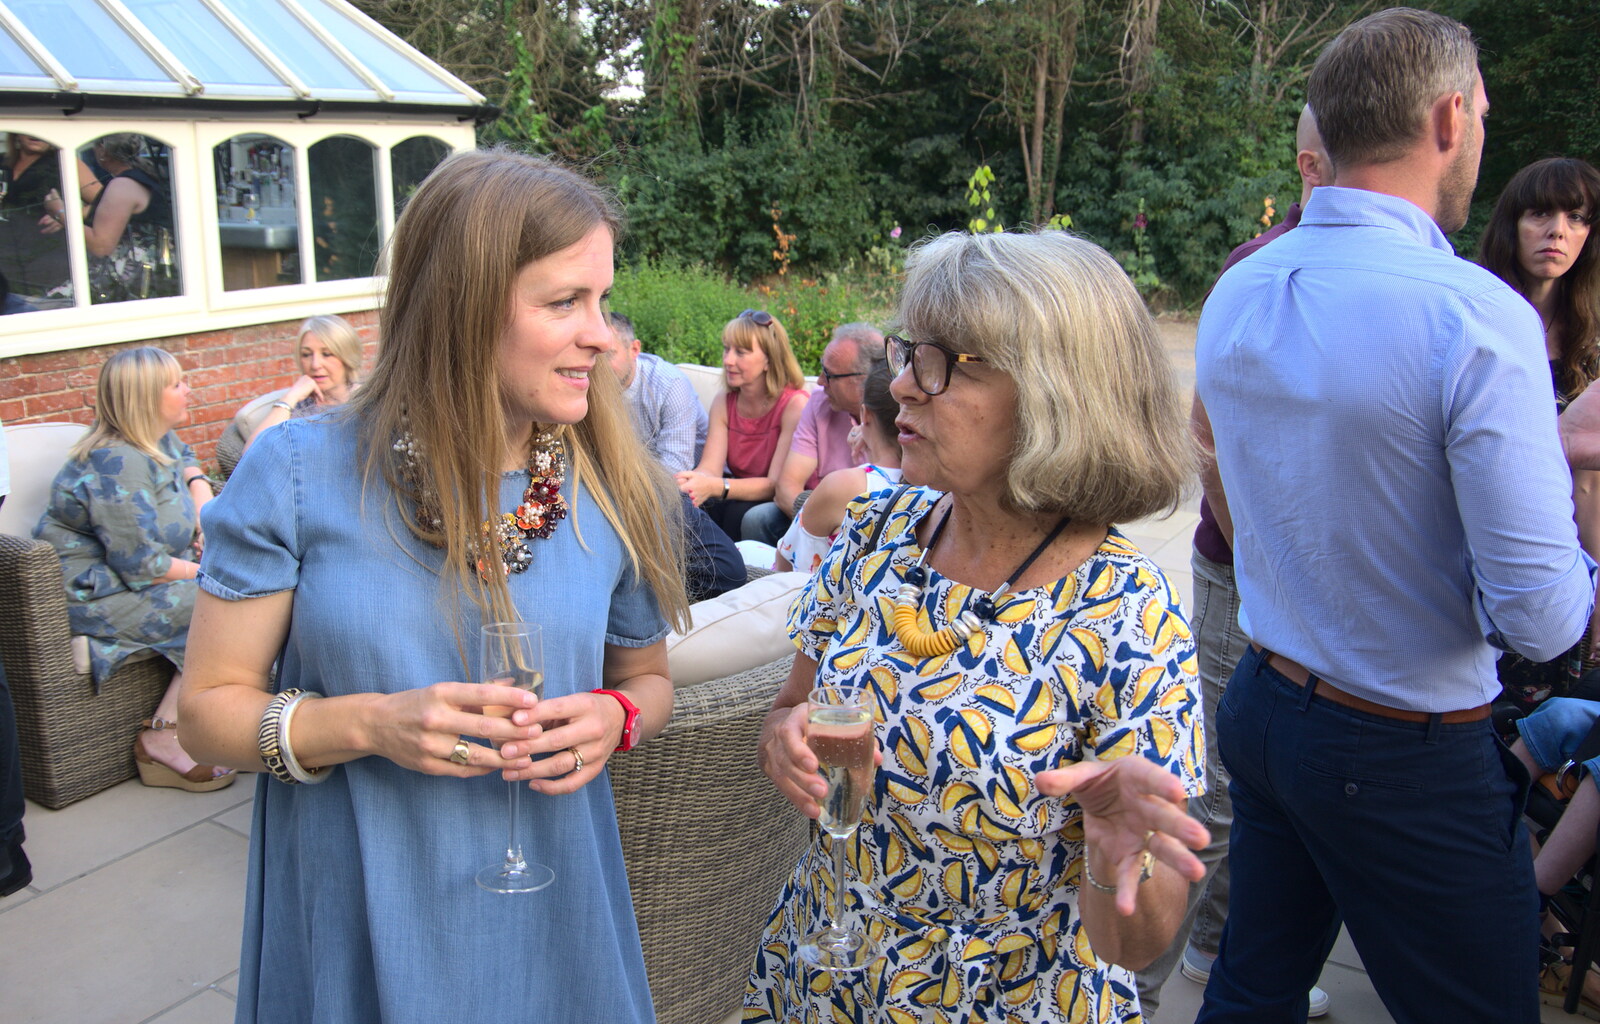 Hannah chats to someone from An Oaksmere Party, Brome, Suffolk - 14th July 2018